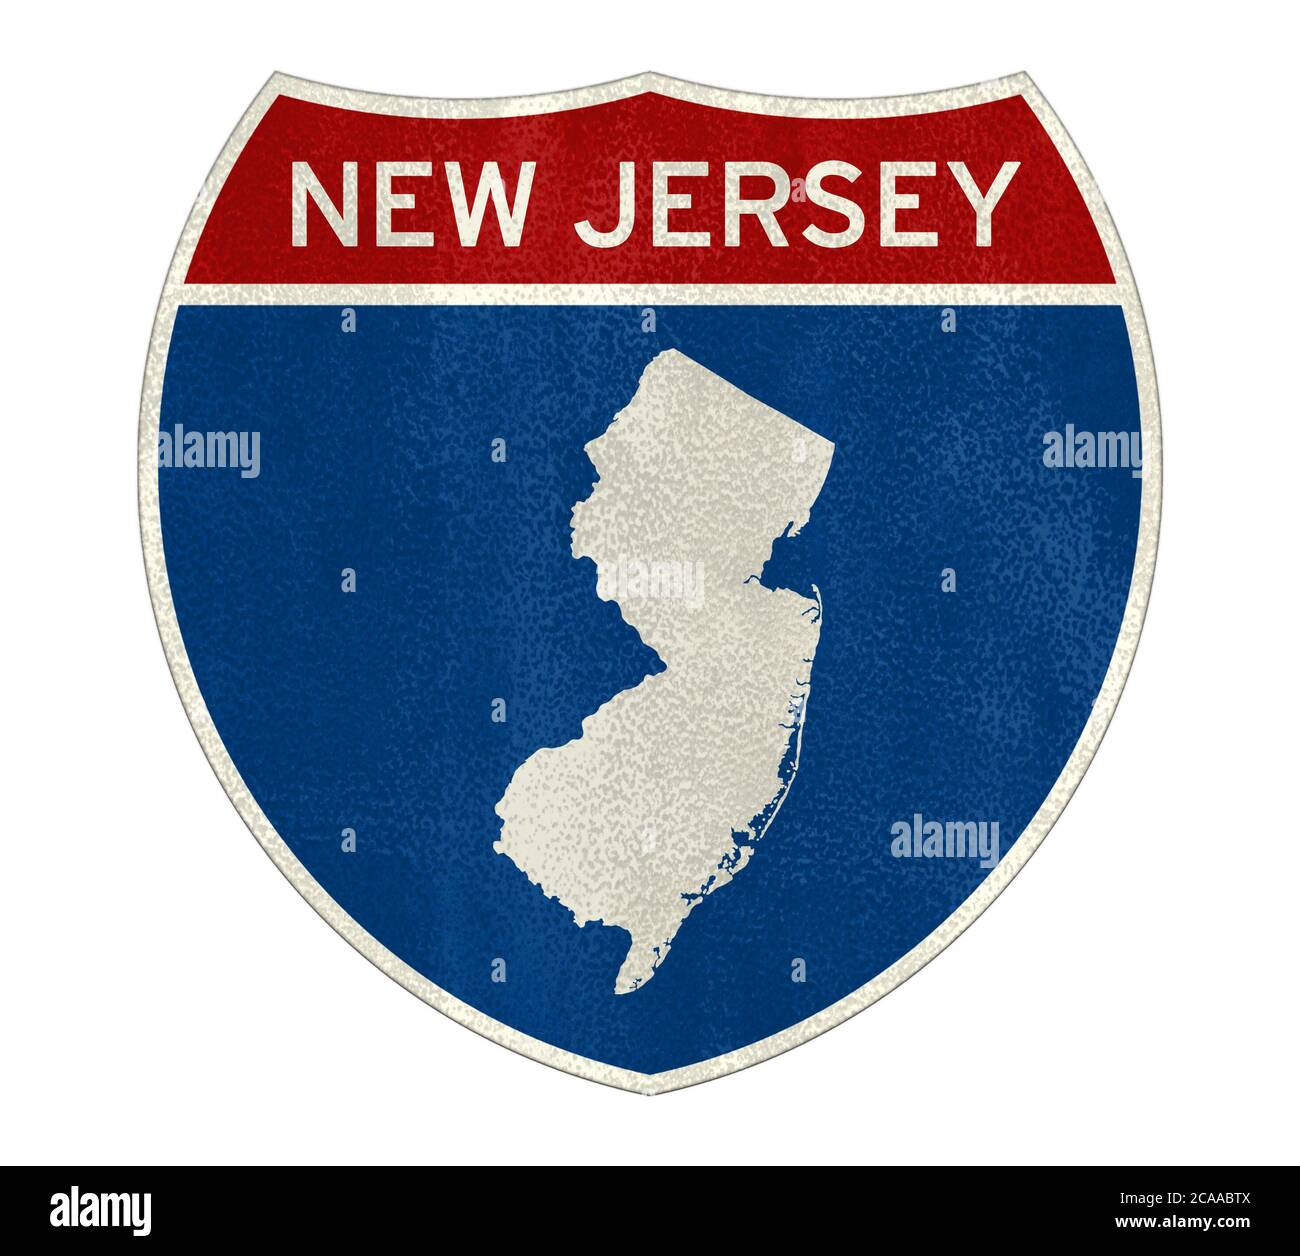 New Jersey Interstate road sign map Stock Photo